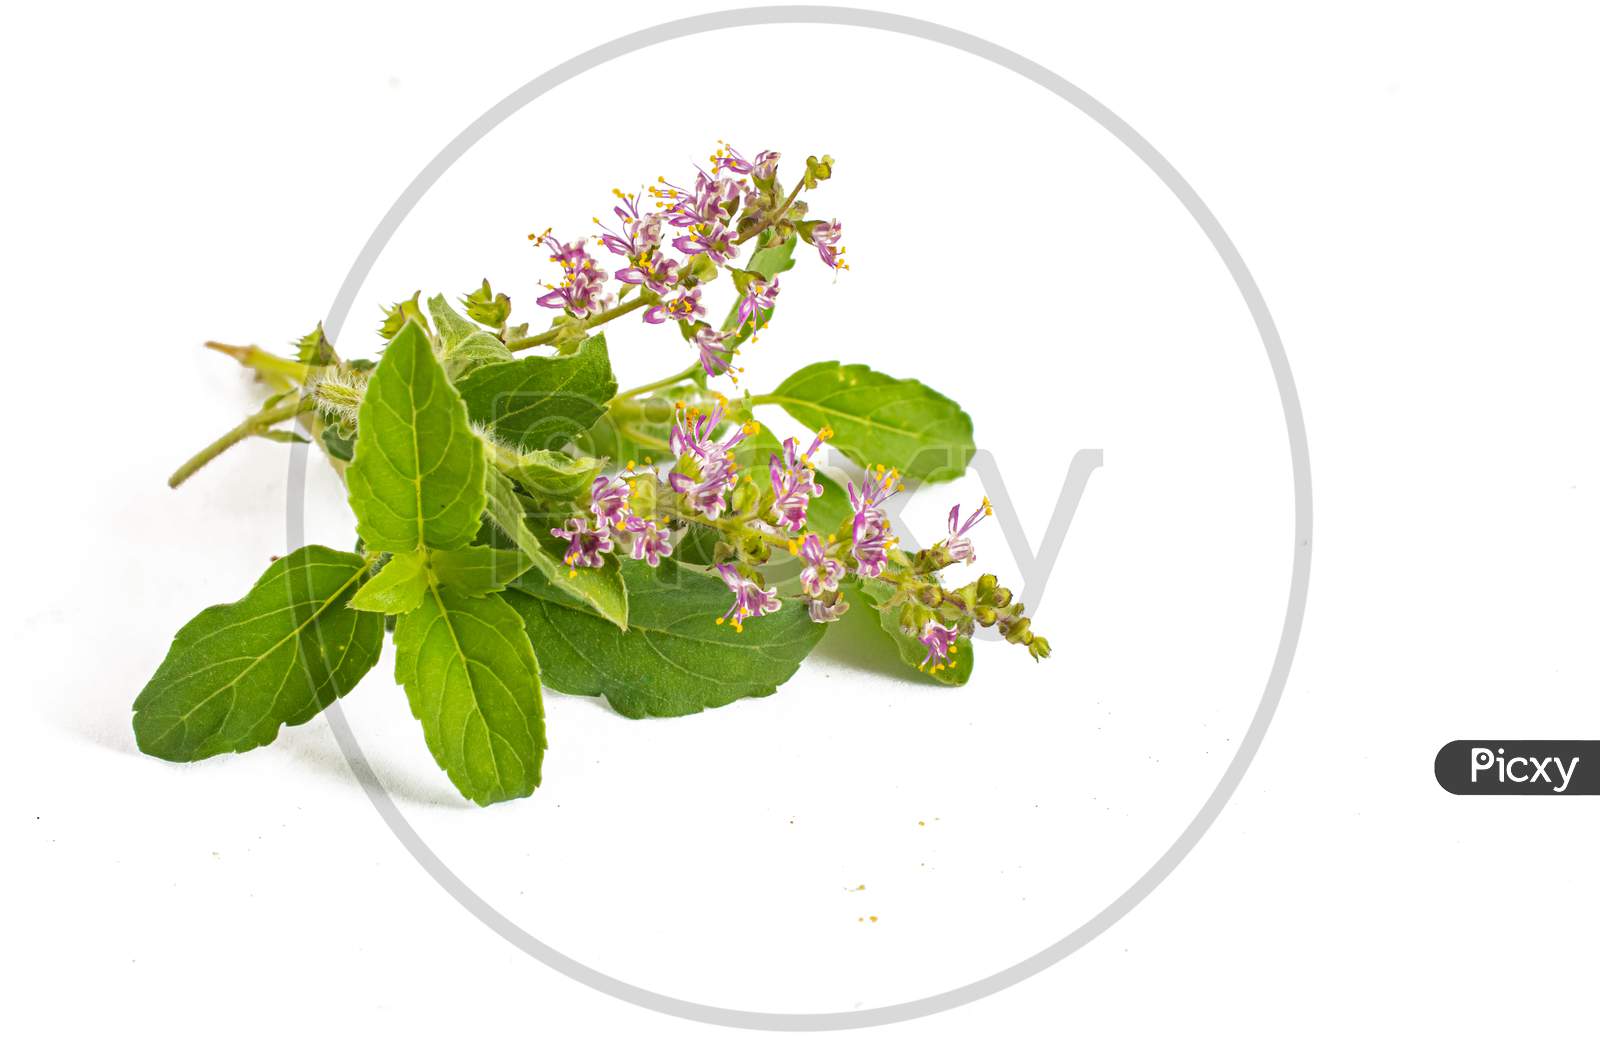 Indian Wild Basil Leaves With Flowers Of Basil On A White Background.